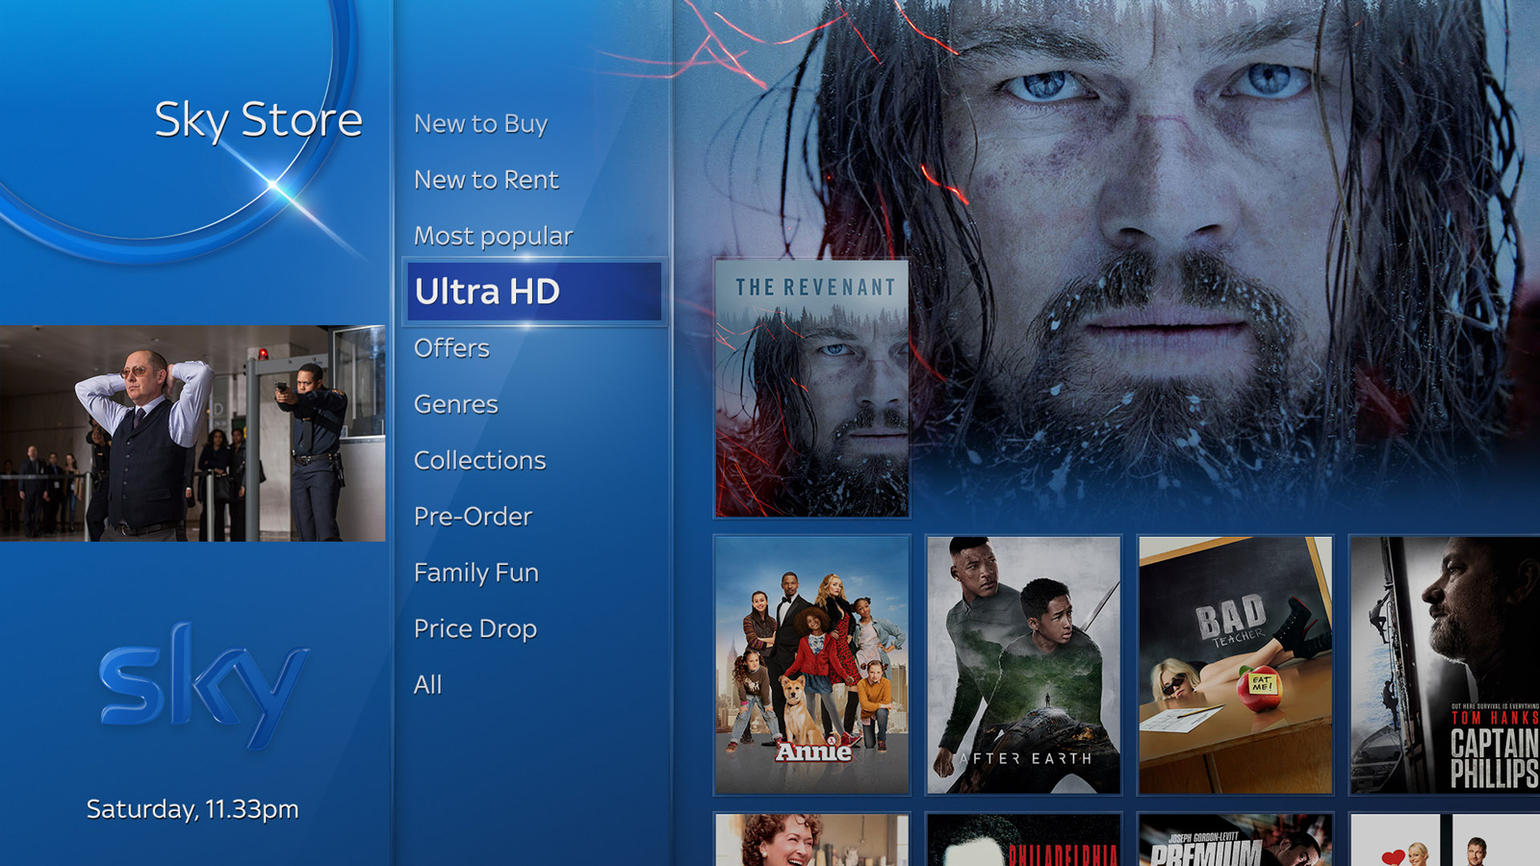 HDR WON'T BE POSSIBLE ON SKY Q...FOR NOW